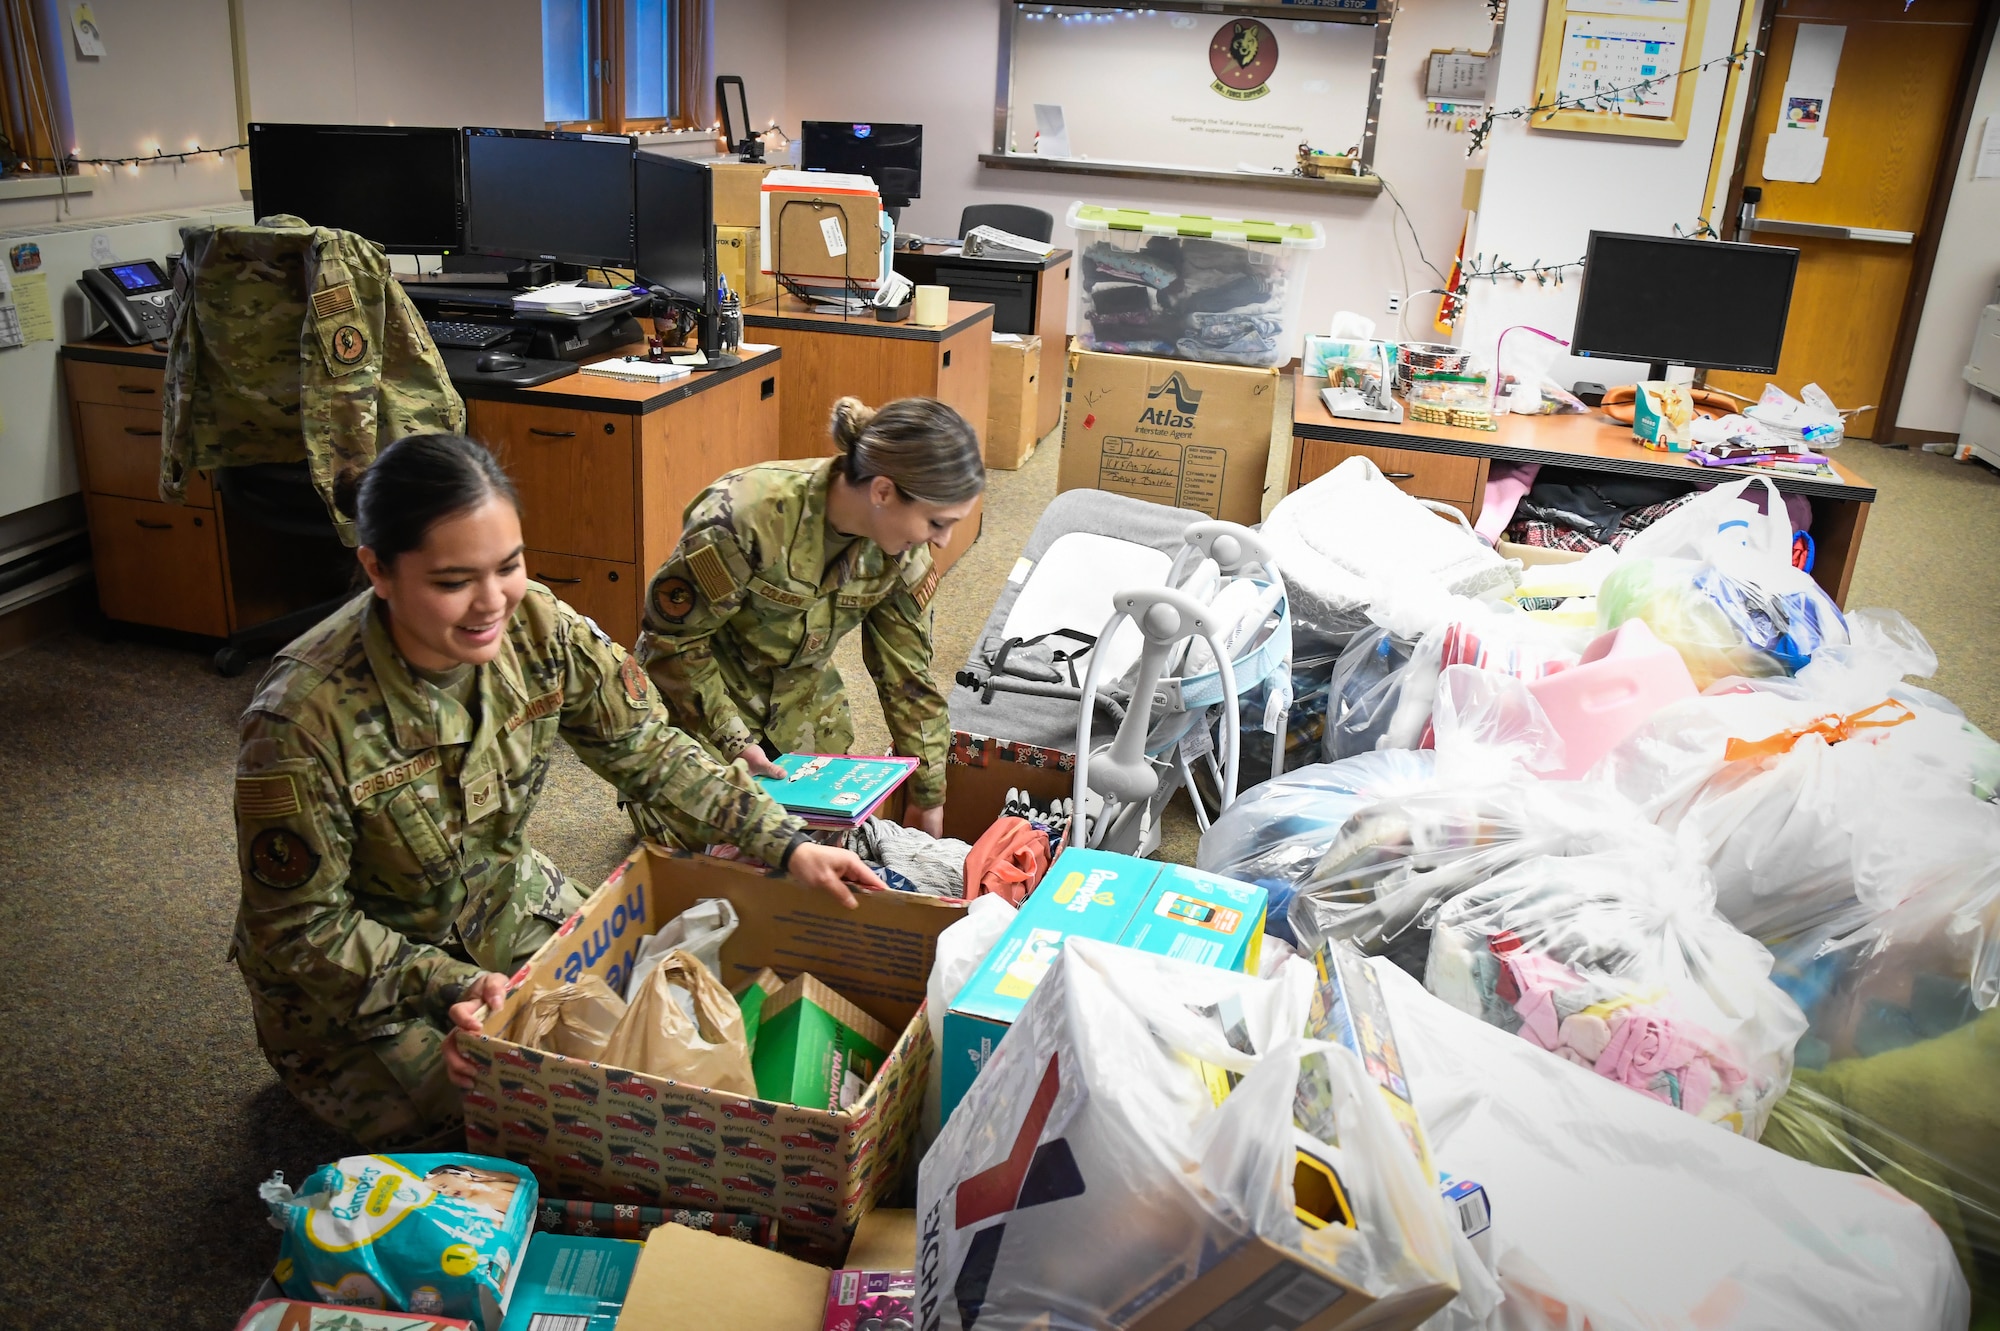 Staff Sgt. Amberylynn Cristostomo left, and Tech Sgt. Tiffany Colburn of the 168th Force Support Squadron organize donations and gifts for the Nonprofit Interior Alaska Center for Non-Violent Living.